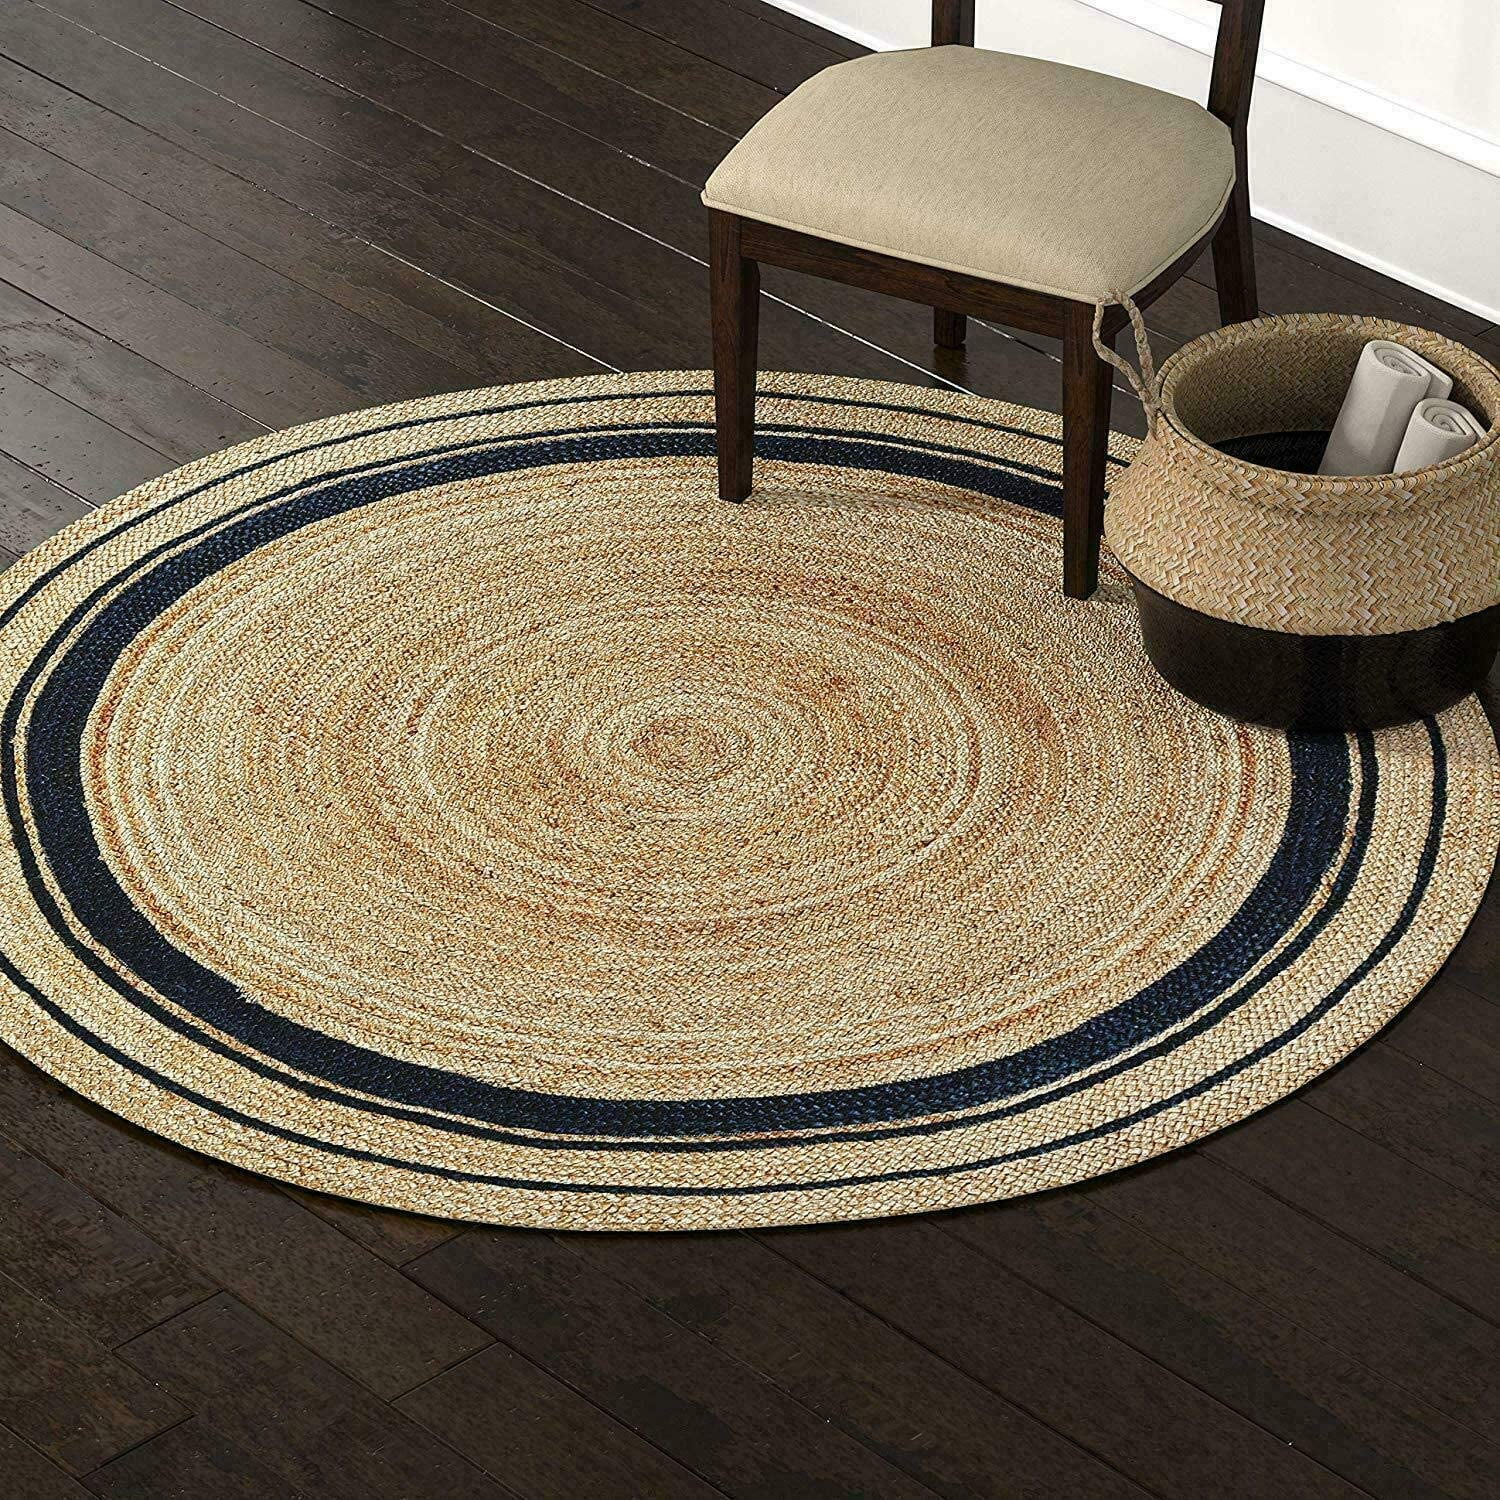 Gahilot International Home Jute Braided Rug Round Natural, Hand Woven  Reversible Rugs for Kitchen Living Room Entryway Round 